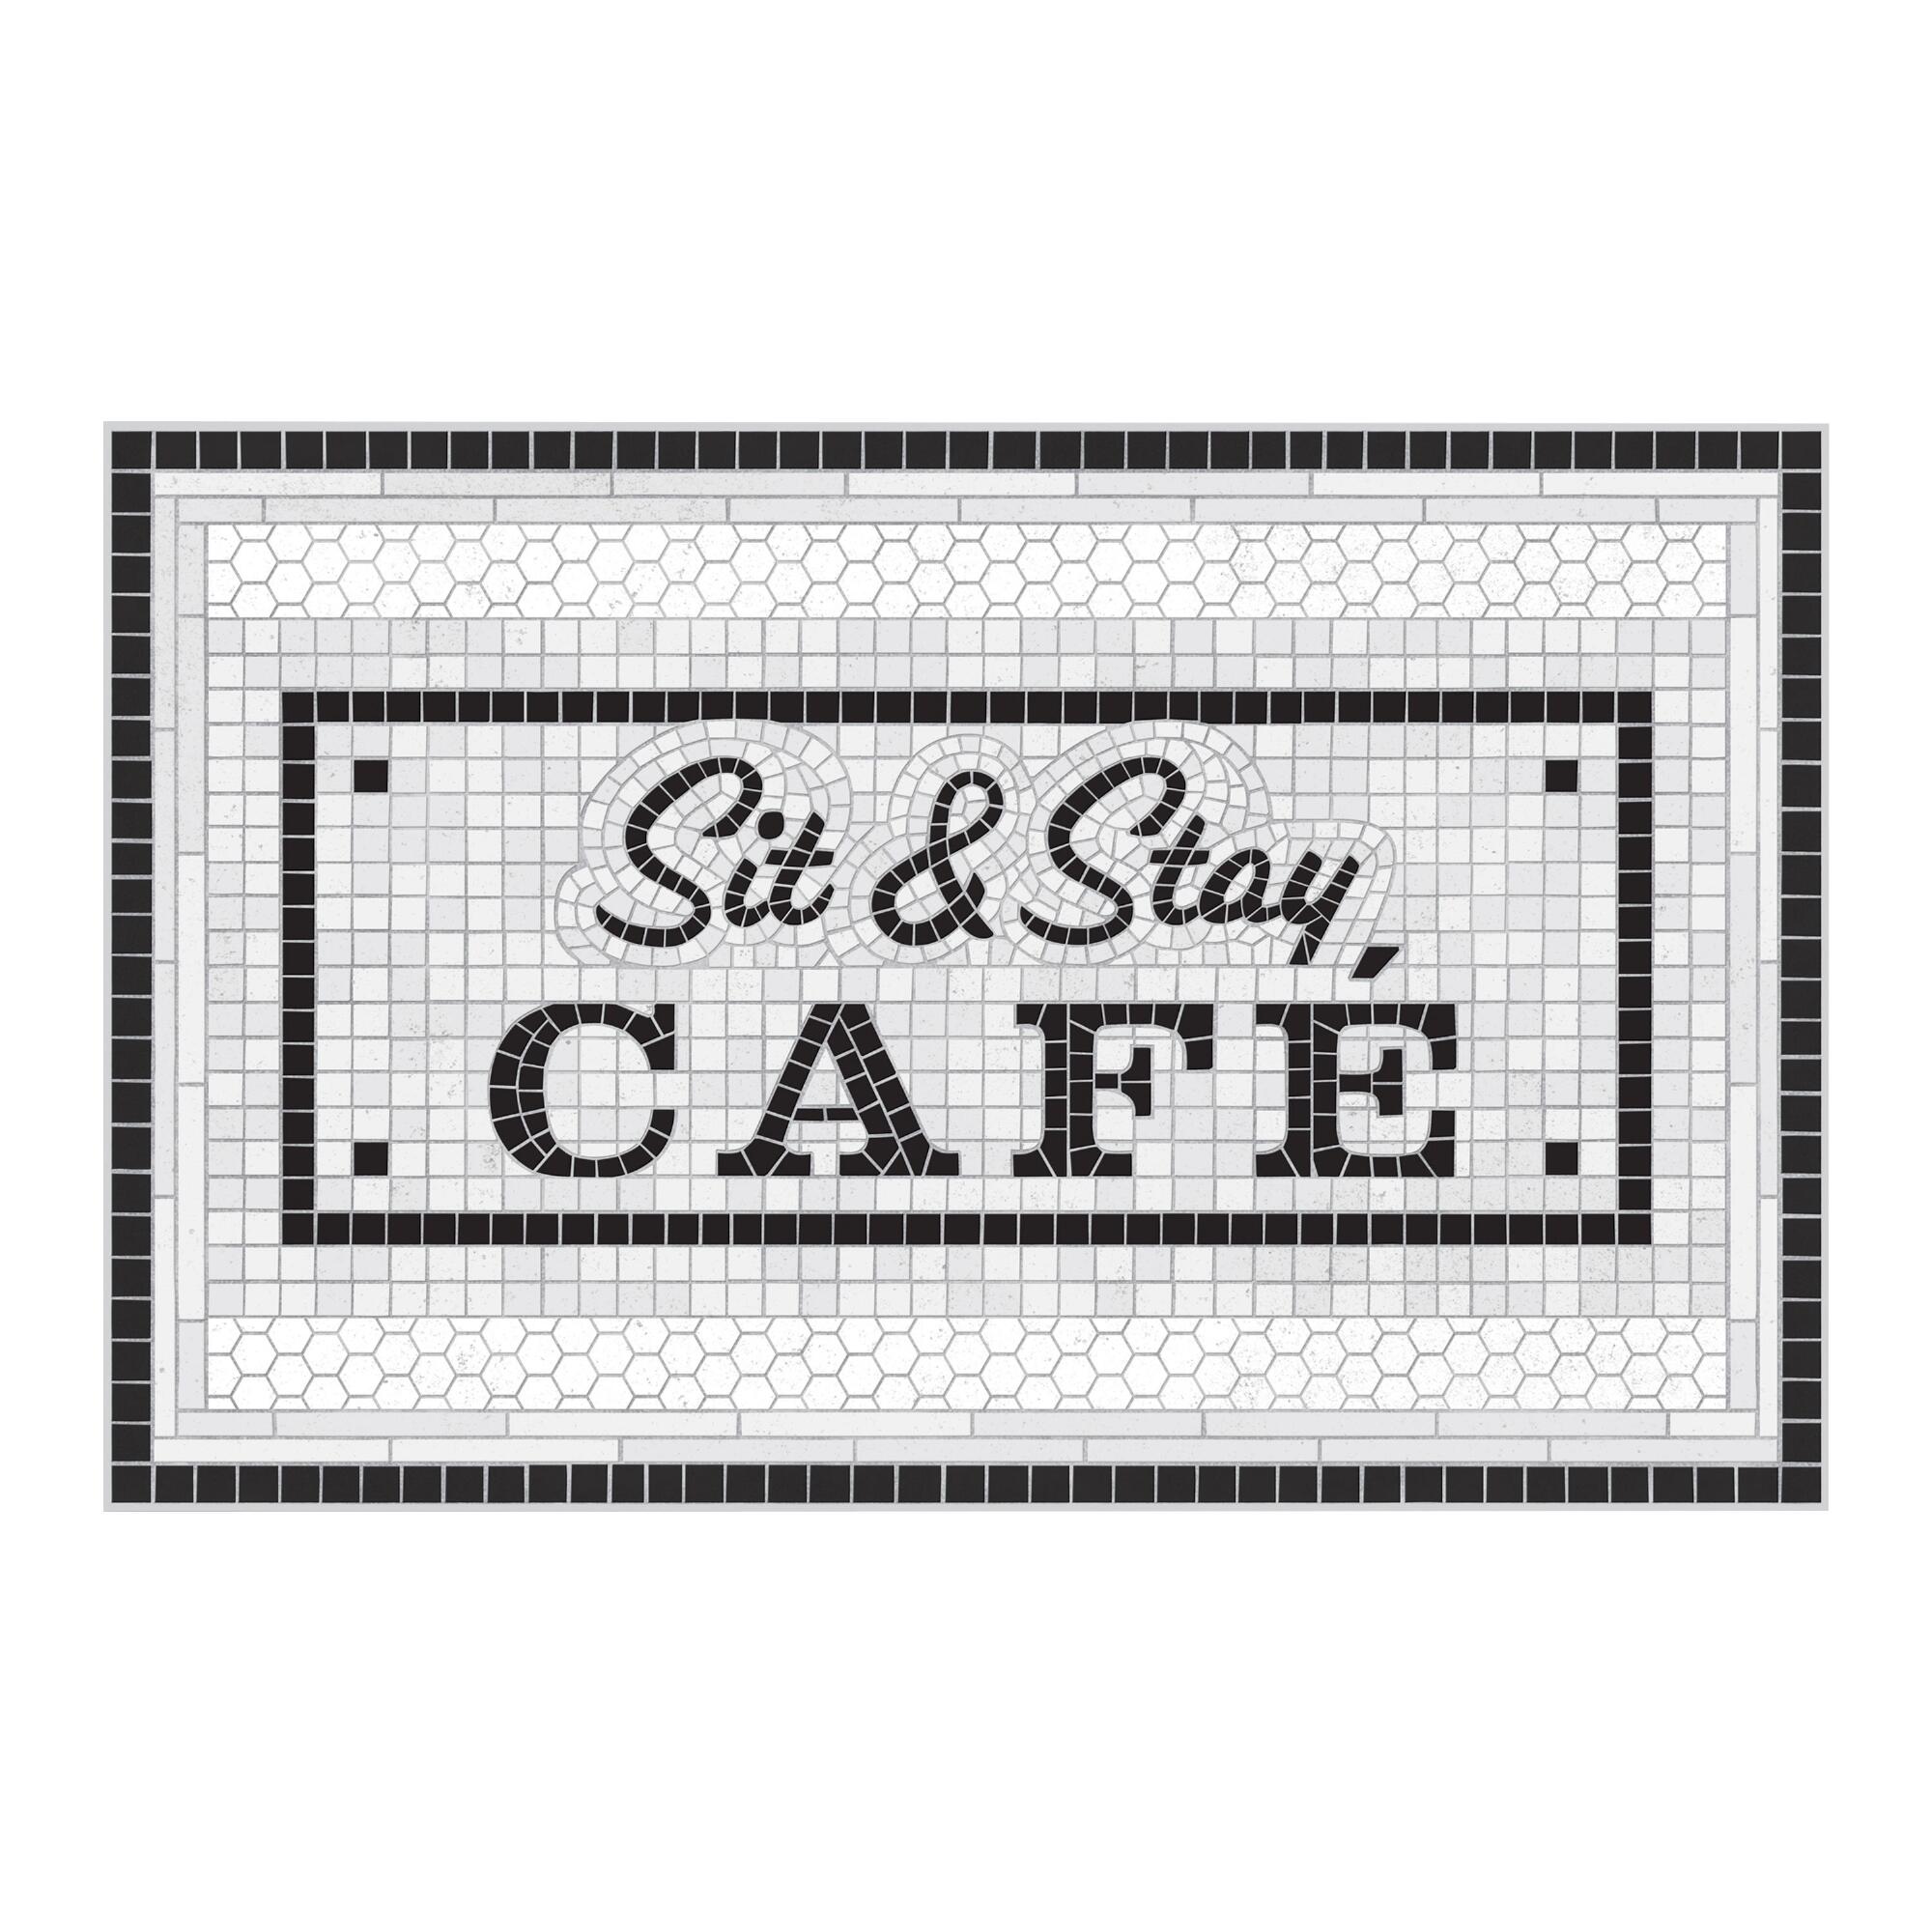 Fred Howligans Sit and Stay Cafe Pet Placemat by World Market